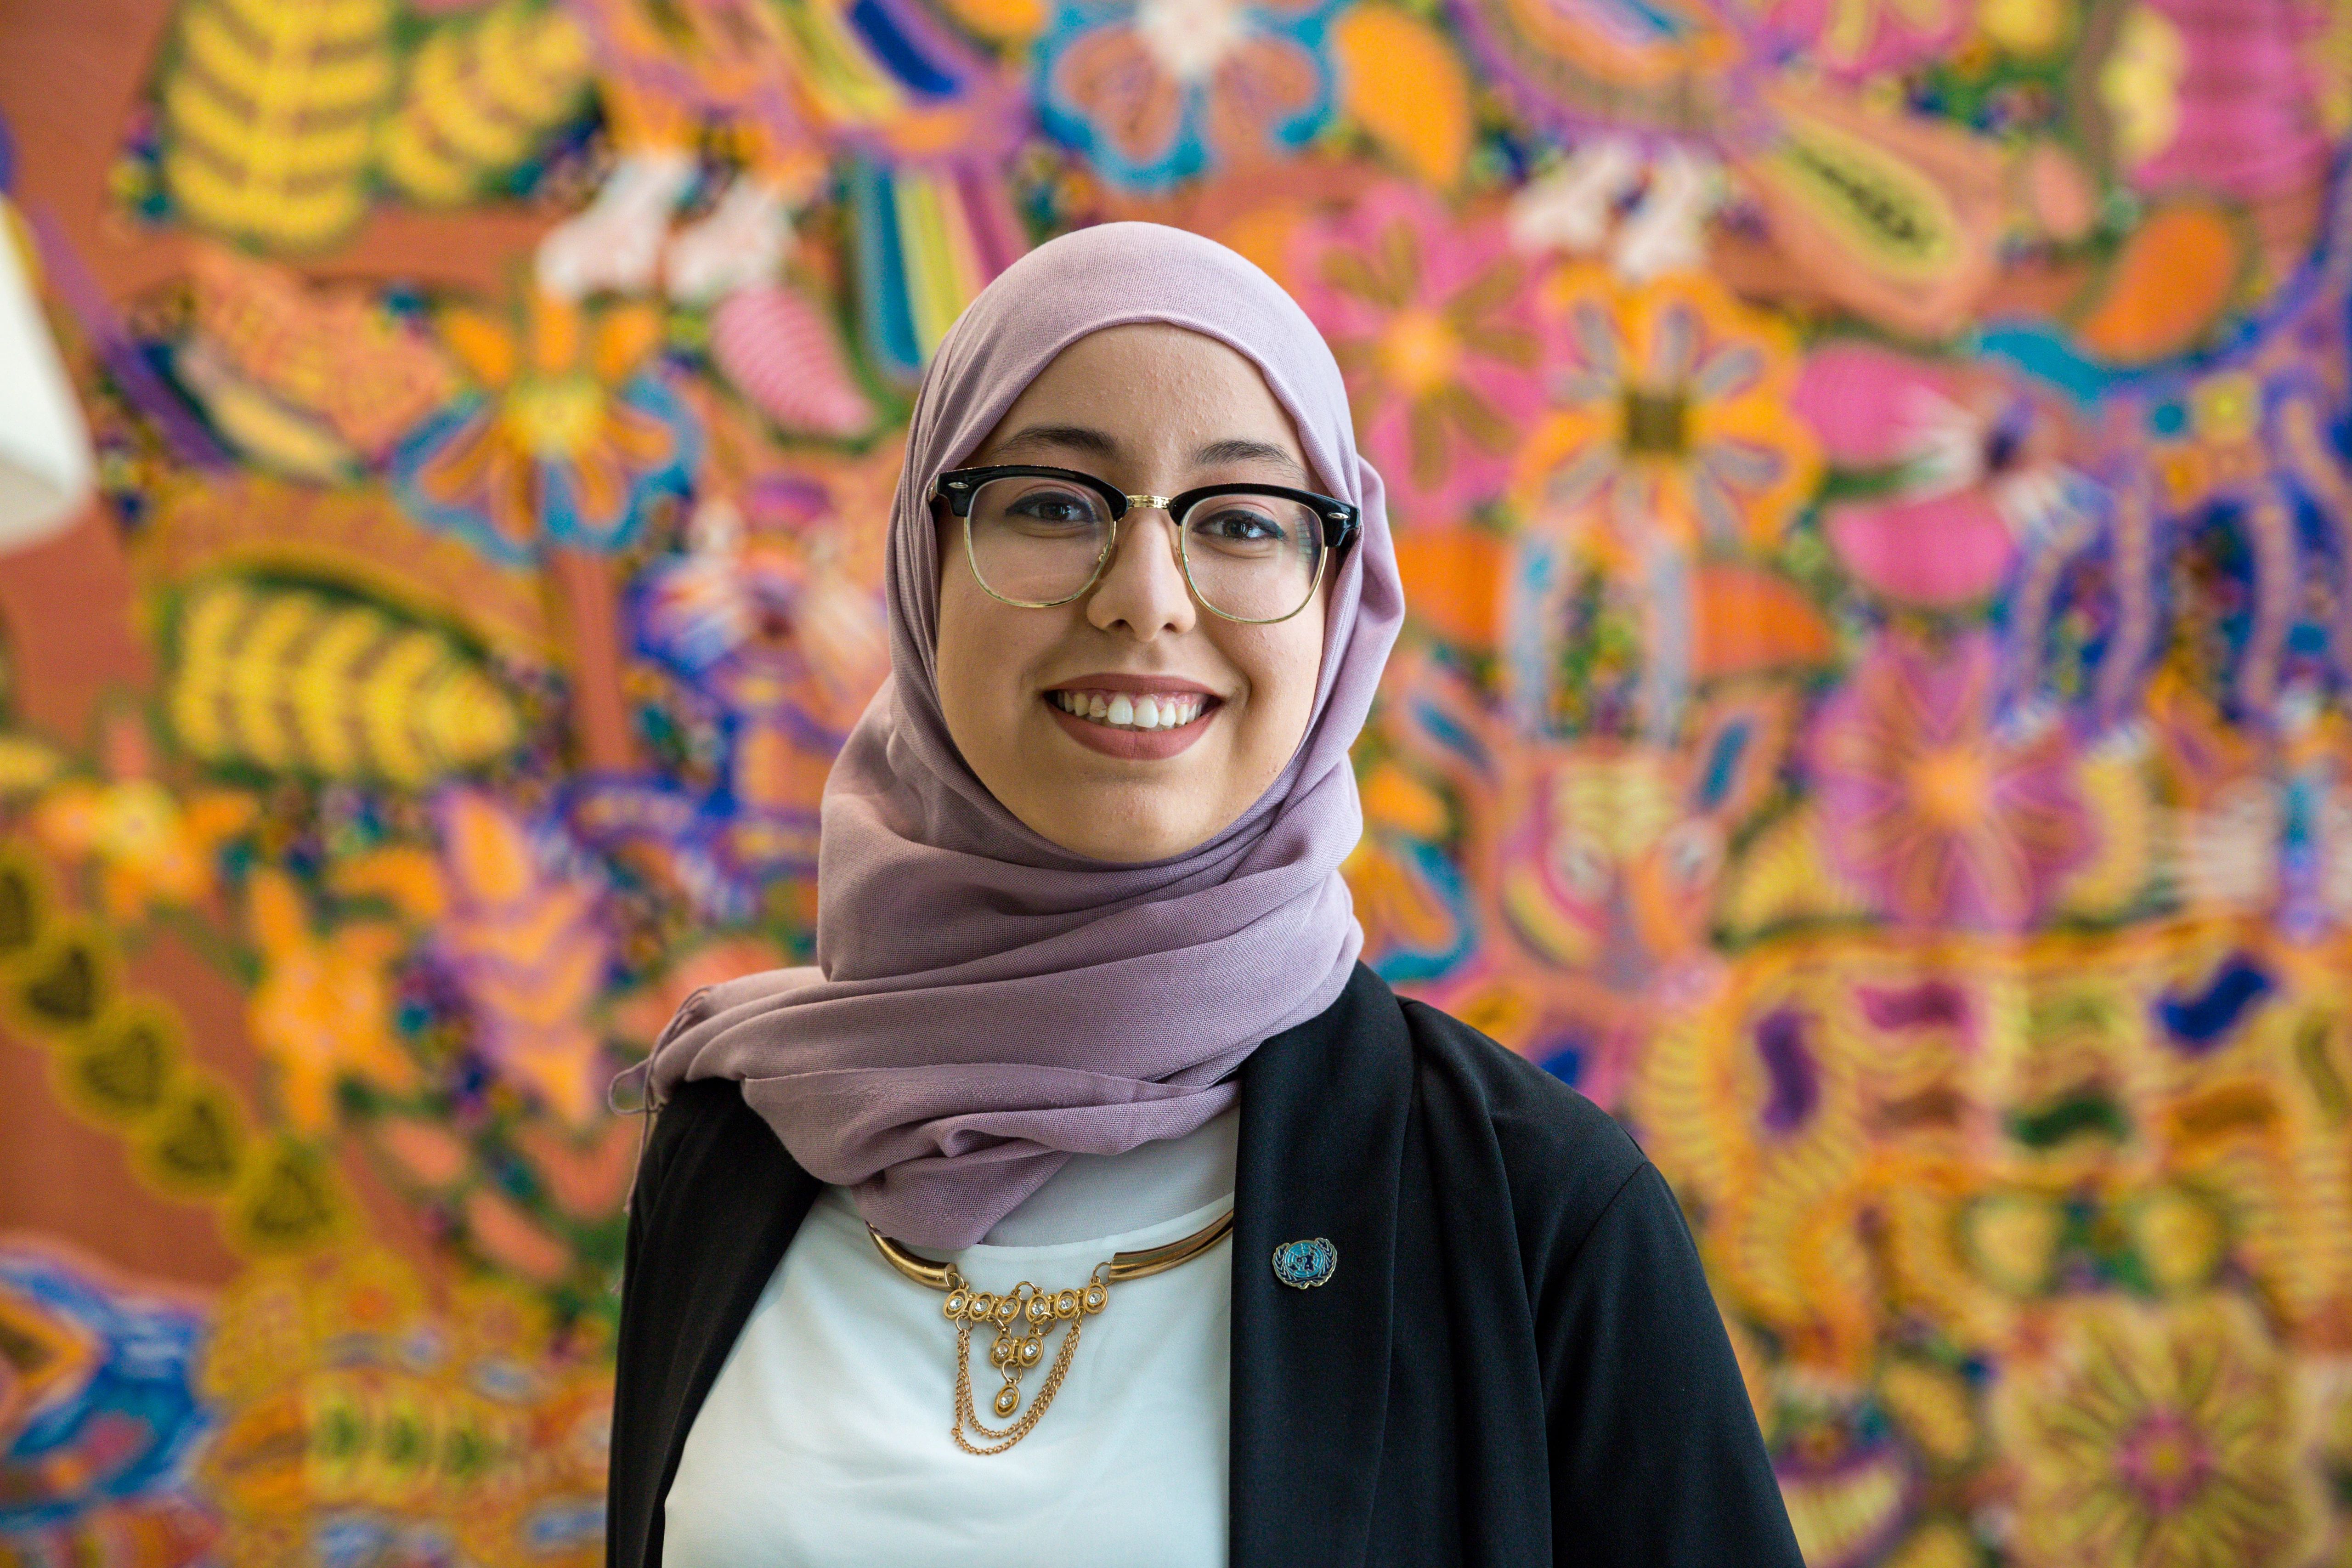 Ameni Kharroubi from Tunisia, Arab Youth Leader at the UN Economic and Social Council (ECOSOC) Youth Forum in 2019.